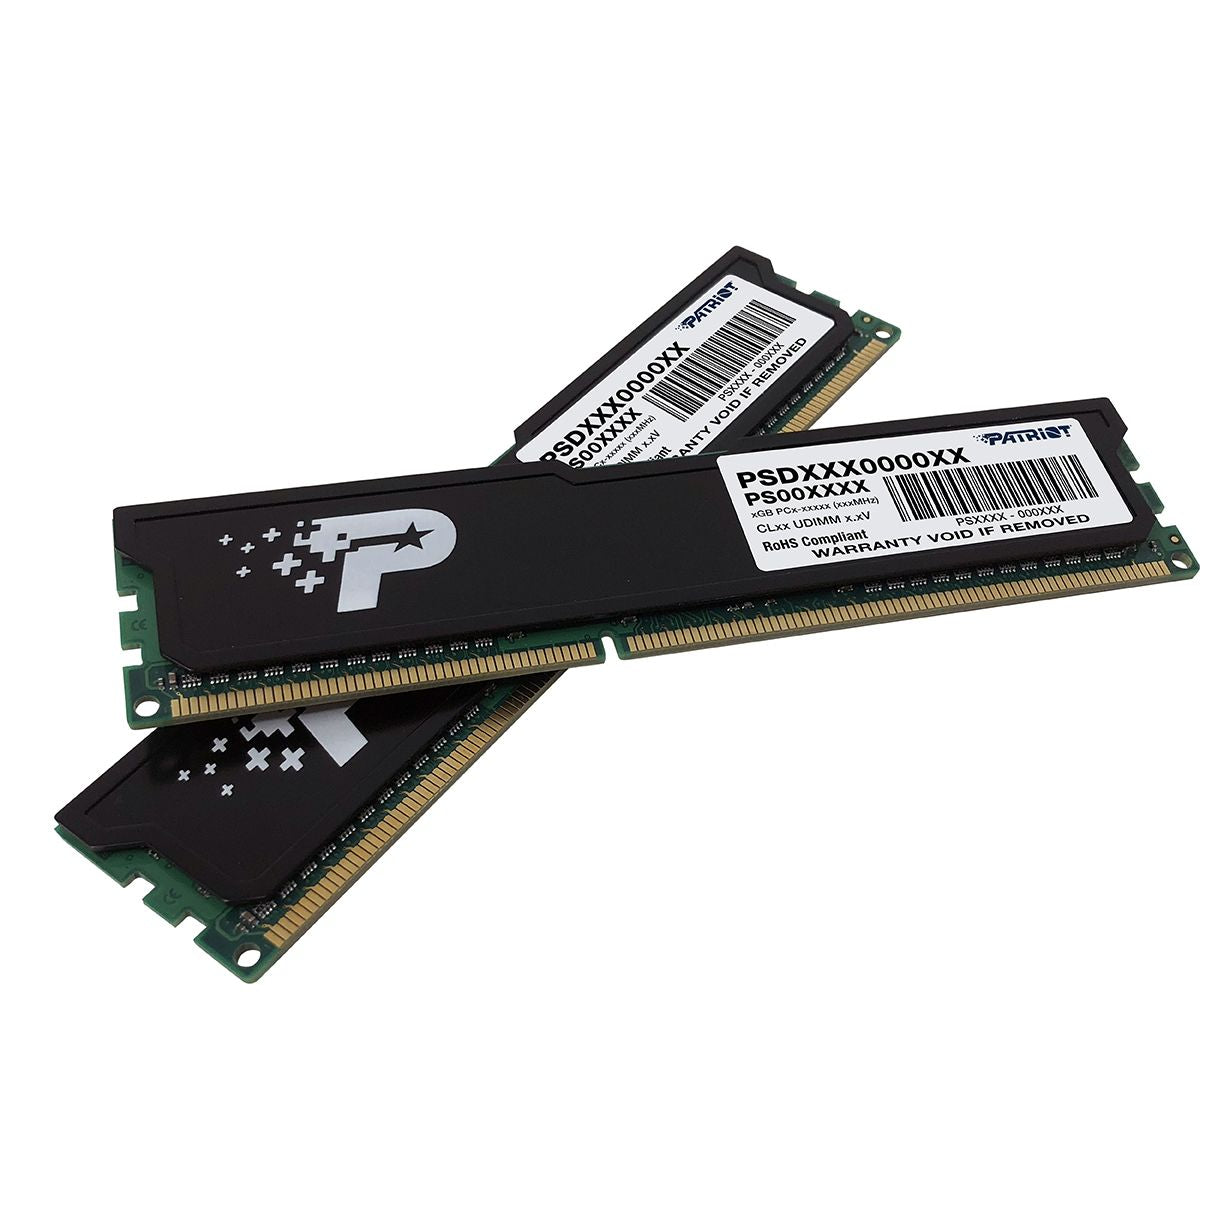 Patriot Signature Series - DDR3 UDIMM PC3-12800 (1600MHz) CL11_Dual Kit with heatshield